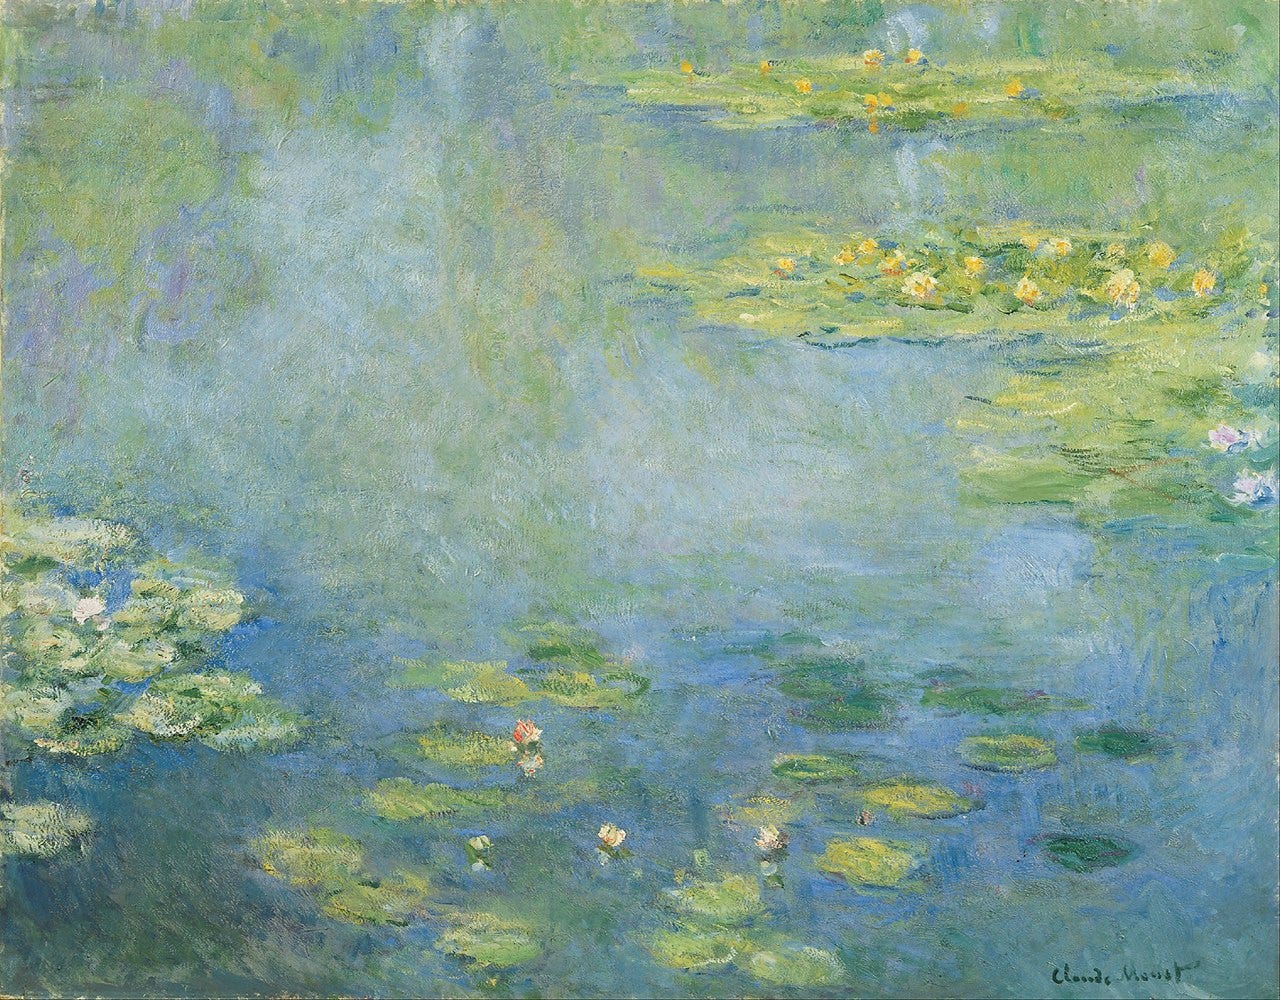 Oil painting. At this triptych's center, lilies bloom in a luminous pool of green and blue that is frothed with lavender-tinged reflections of clouds. Thick strokes in darker shades seep into the left panel, while on the right, sky and water are gently swallowed by an expanse of reddish-green vegetation.